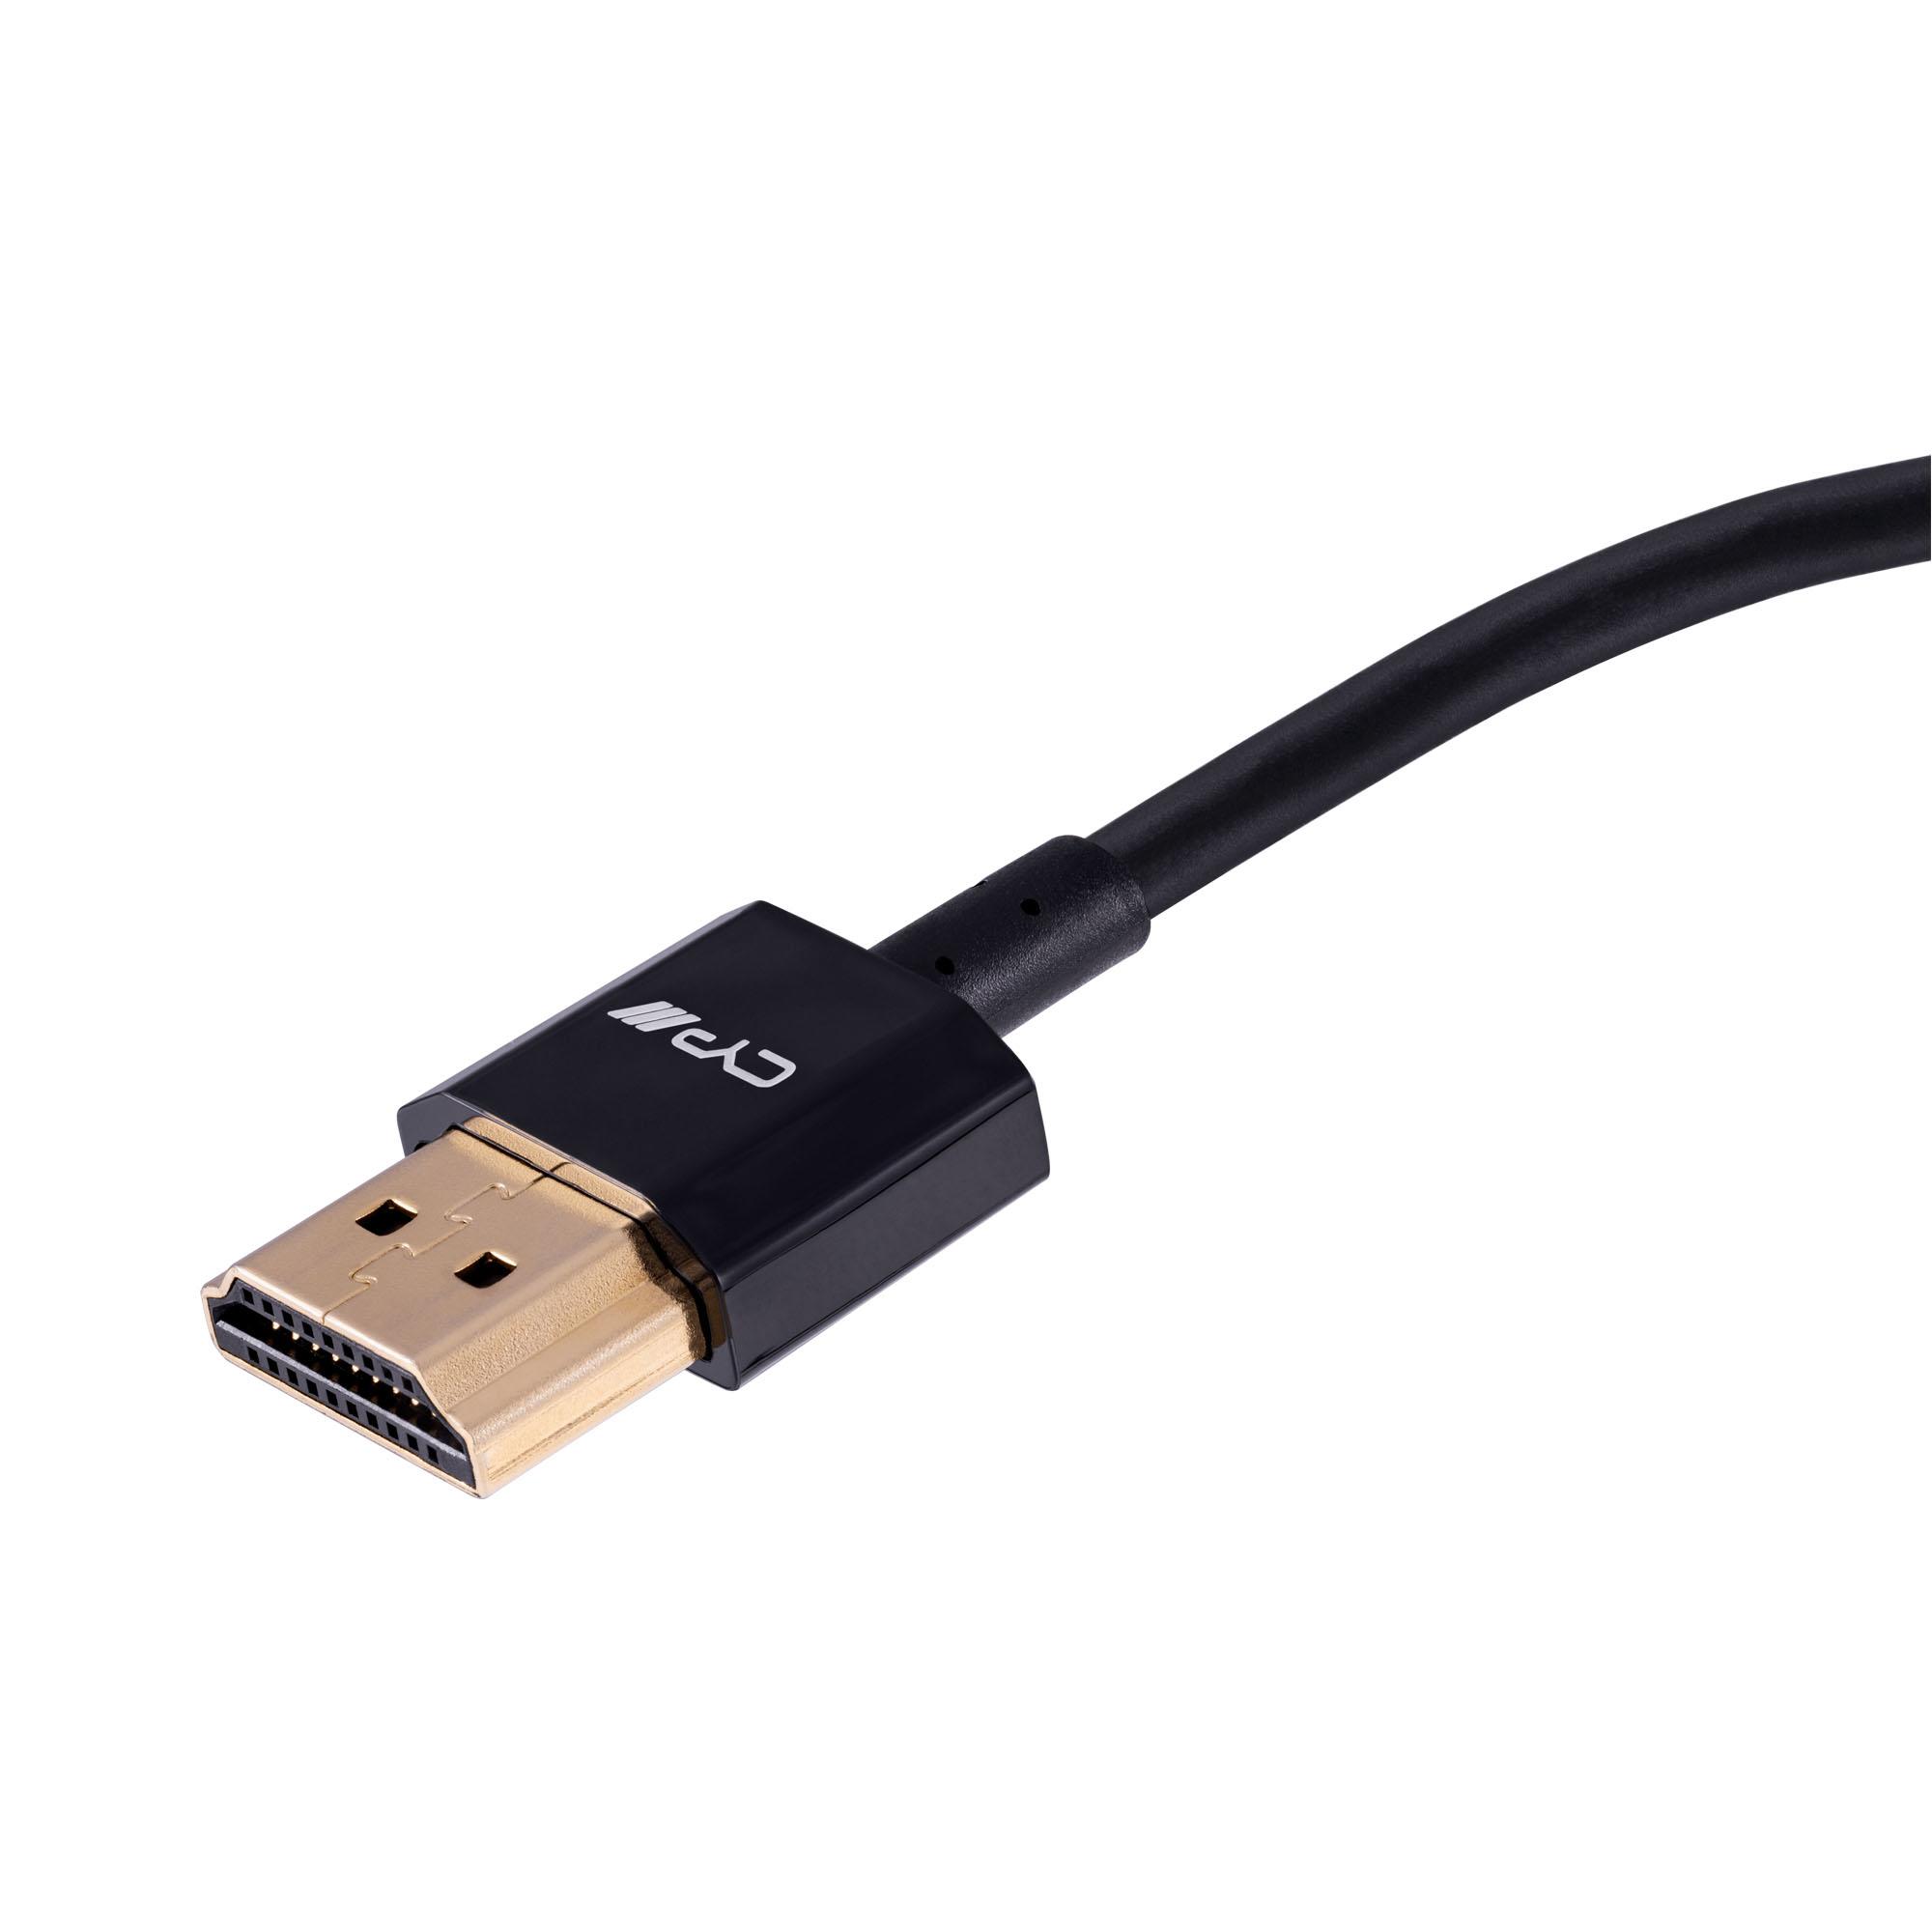 HDMI2-US/050 0.5m New Ultra Slim - High Speed with Ethernet HDMI Cable - (HDMI 2.0 & 4K Certified)